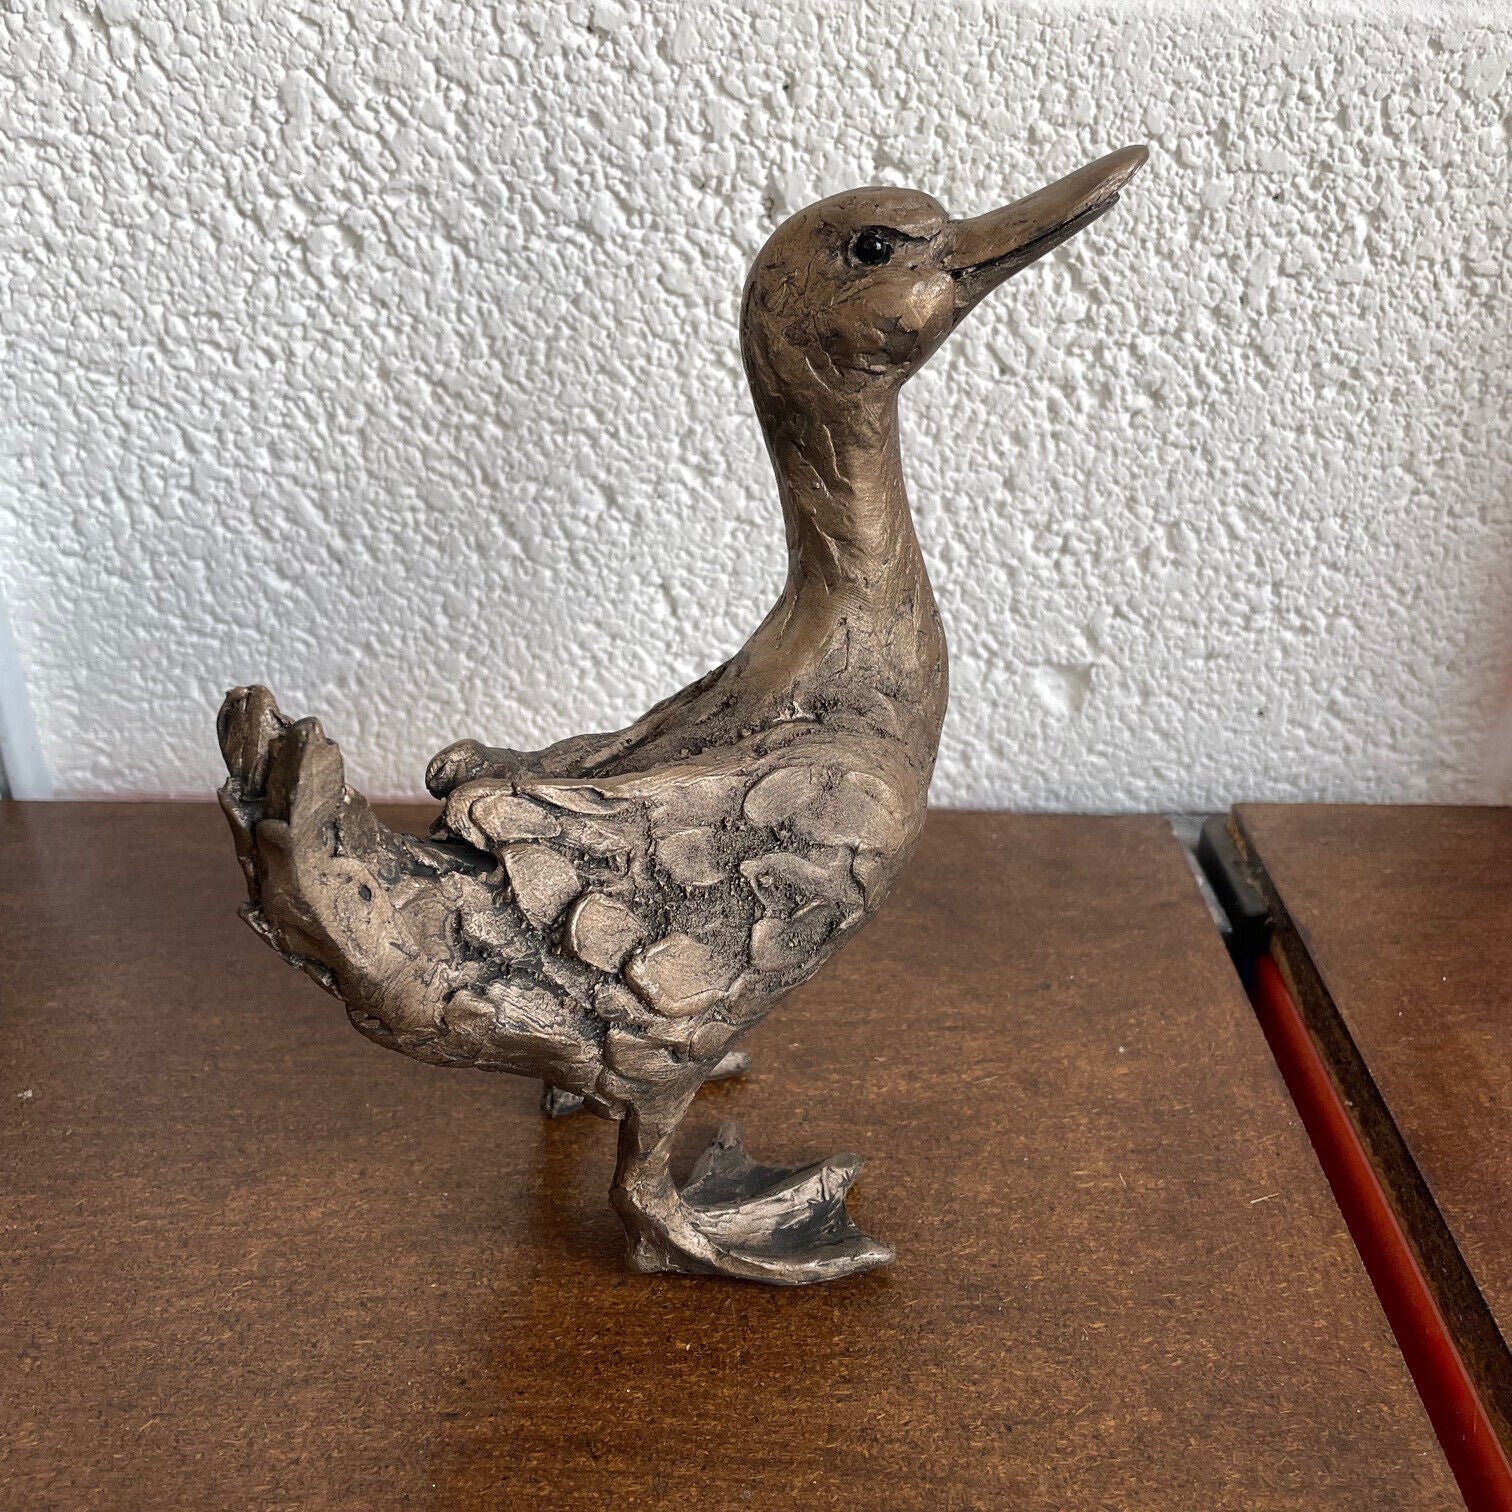 Frith - Dilly Duck With Beak Up Sculpture By Thomas Meadows